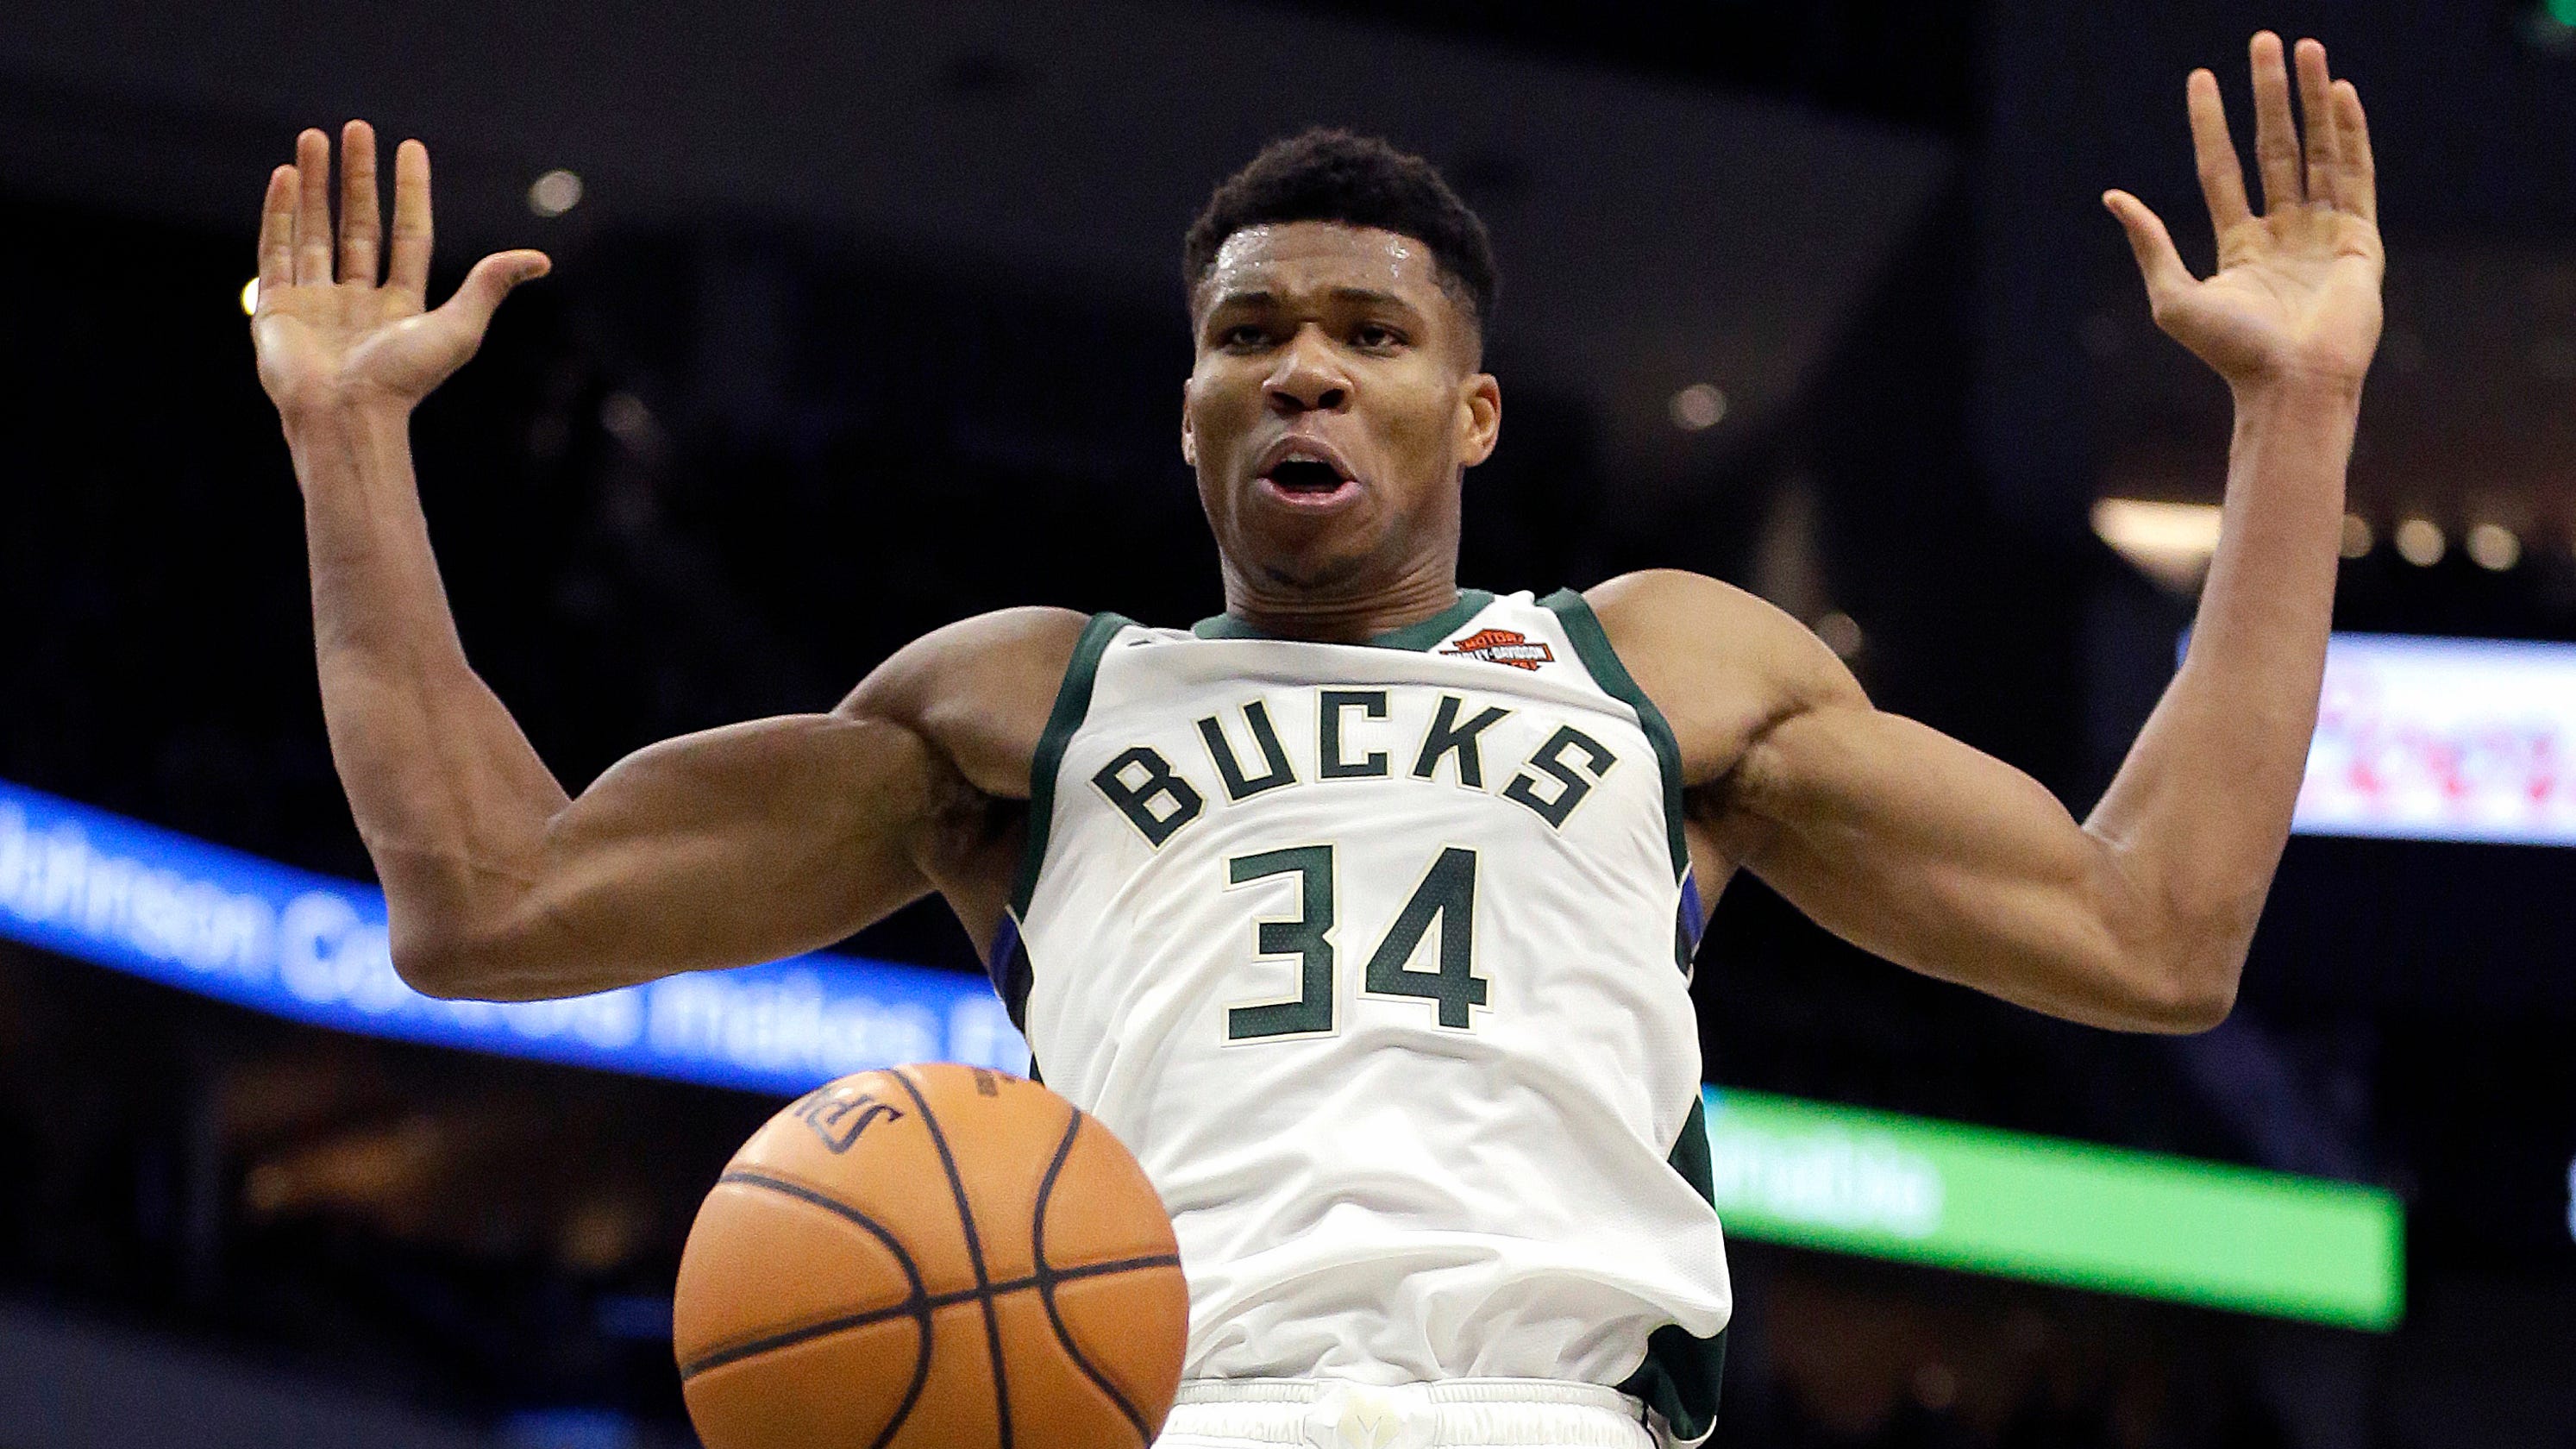 Giannis Antetokounmpo putting up big numbers, but just getting started2987 x 1680